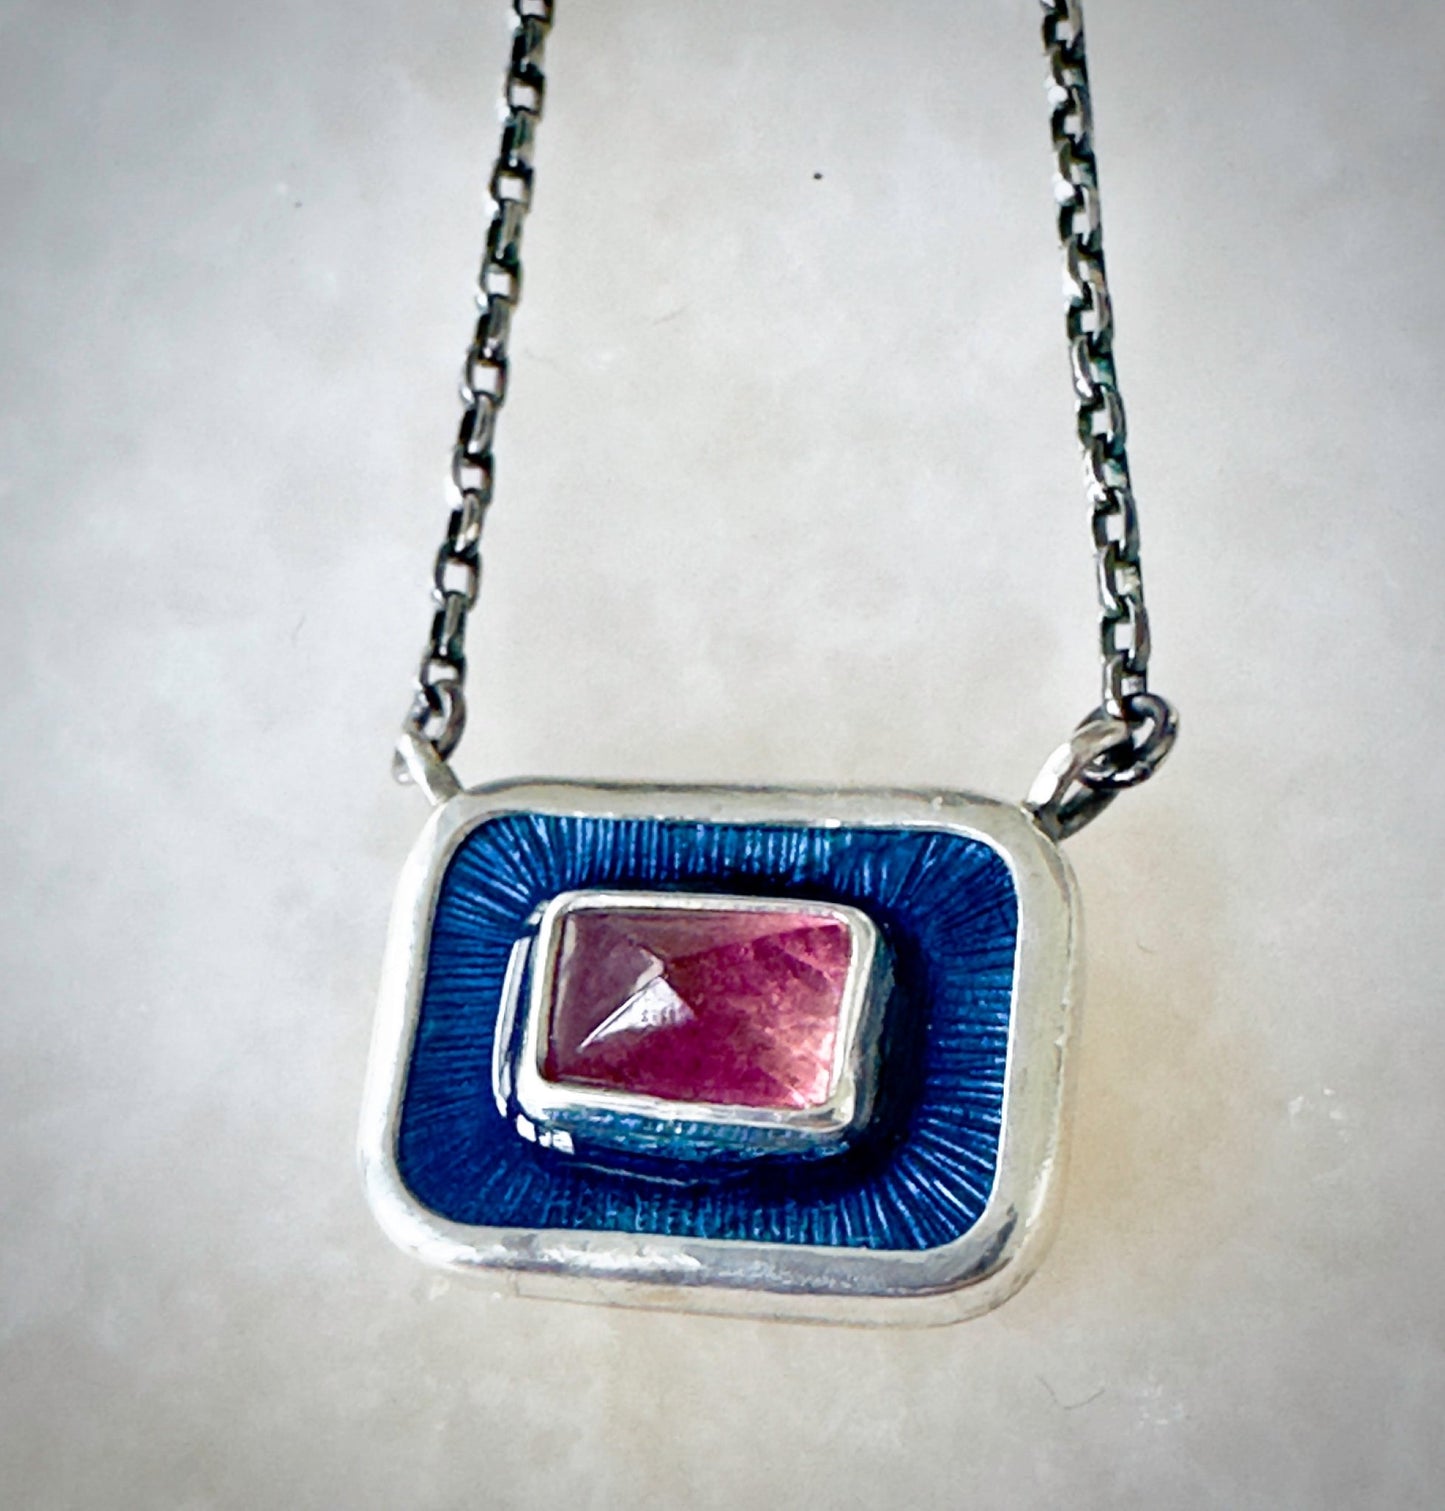 Pink Tourmaline Pyramid in Blue Enamel Chiclet Necklace - Bluecave Jewelry